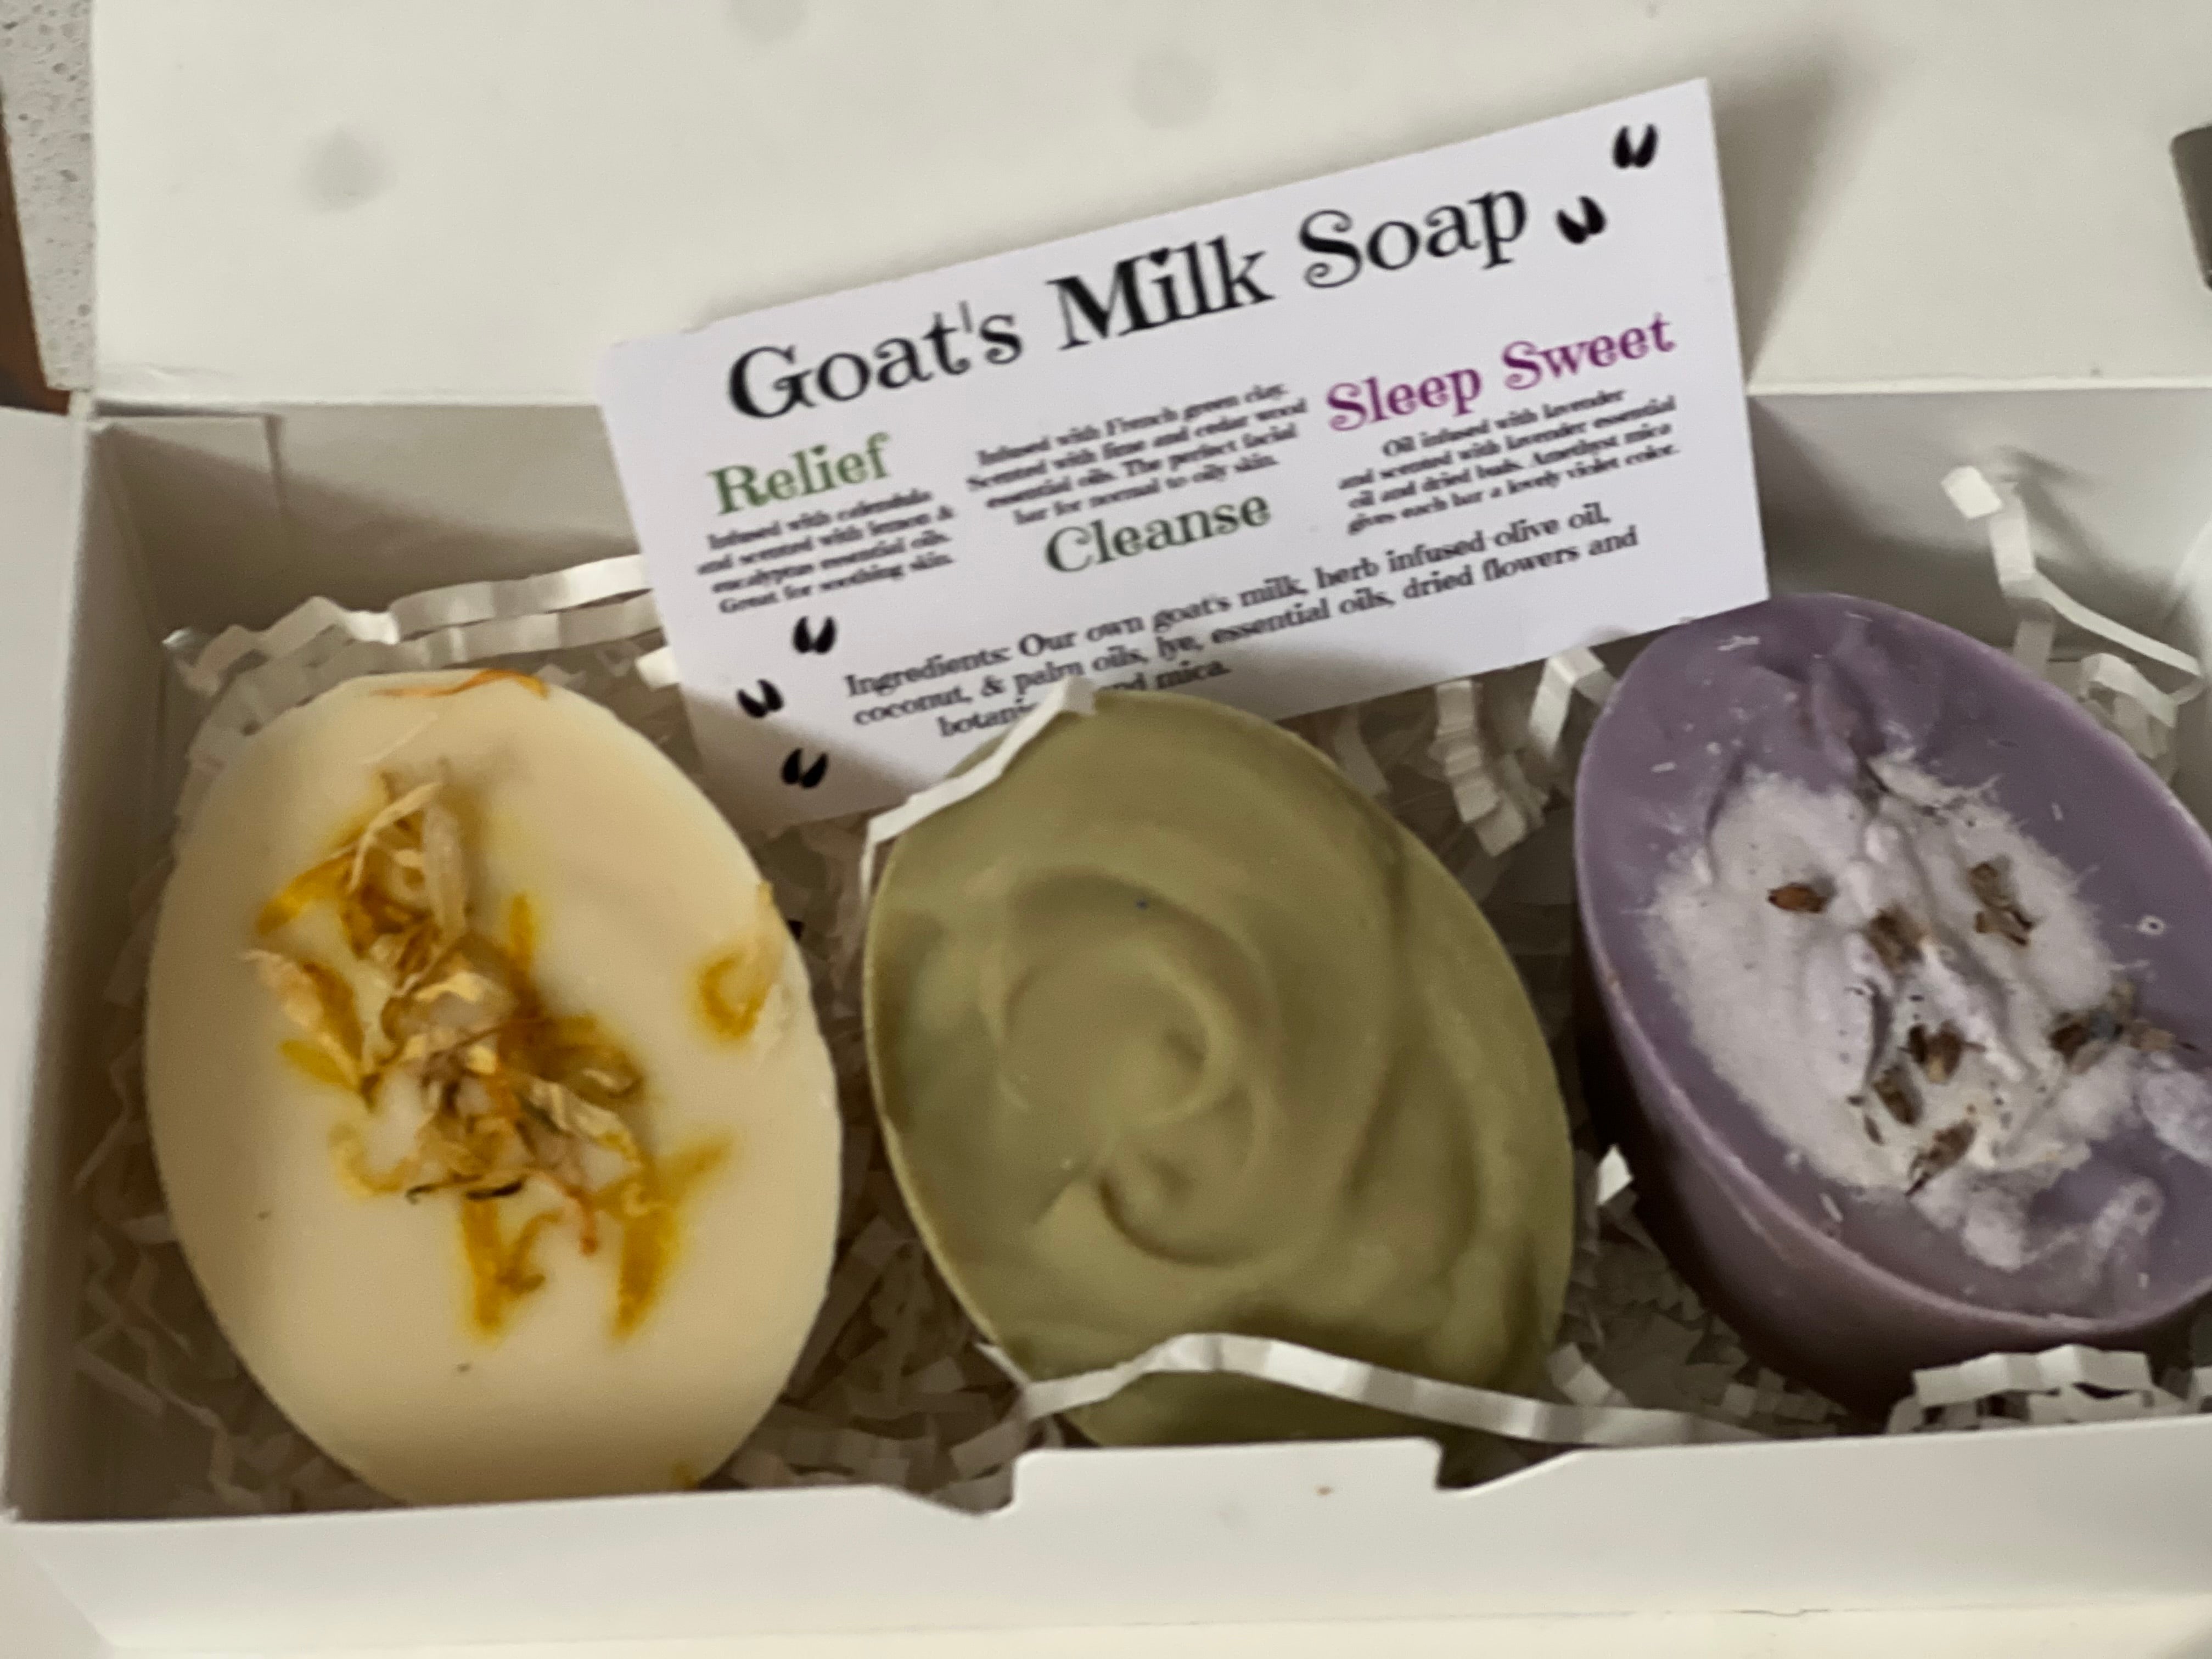 Soap Goat’s Milk Gift Pack: Relief-Cleanse-Sleep Sweet